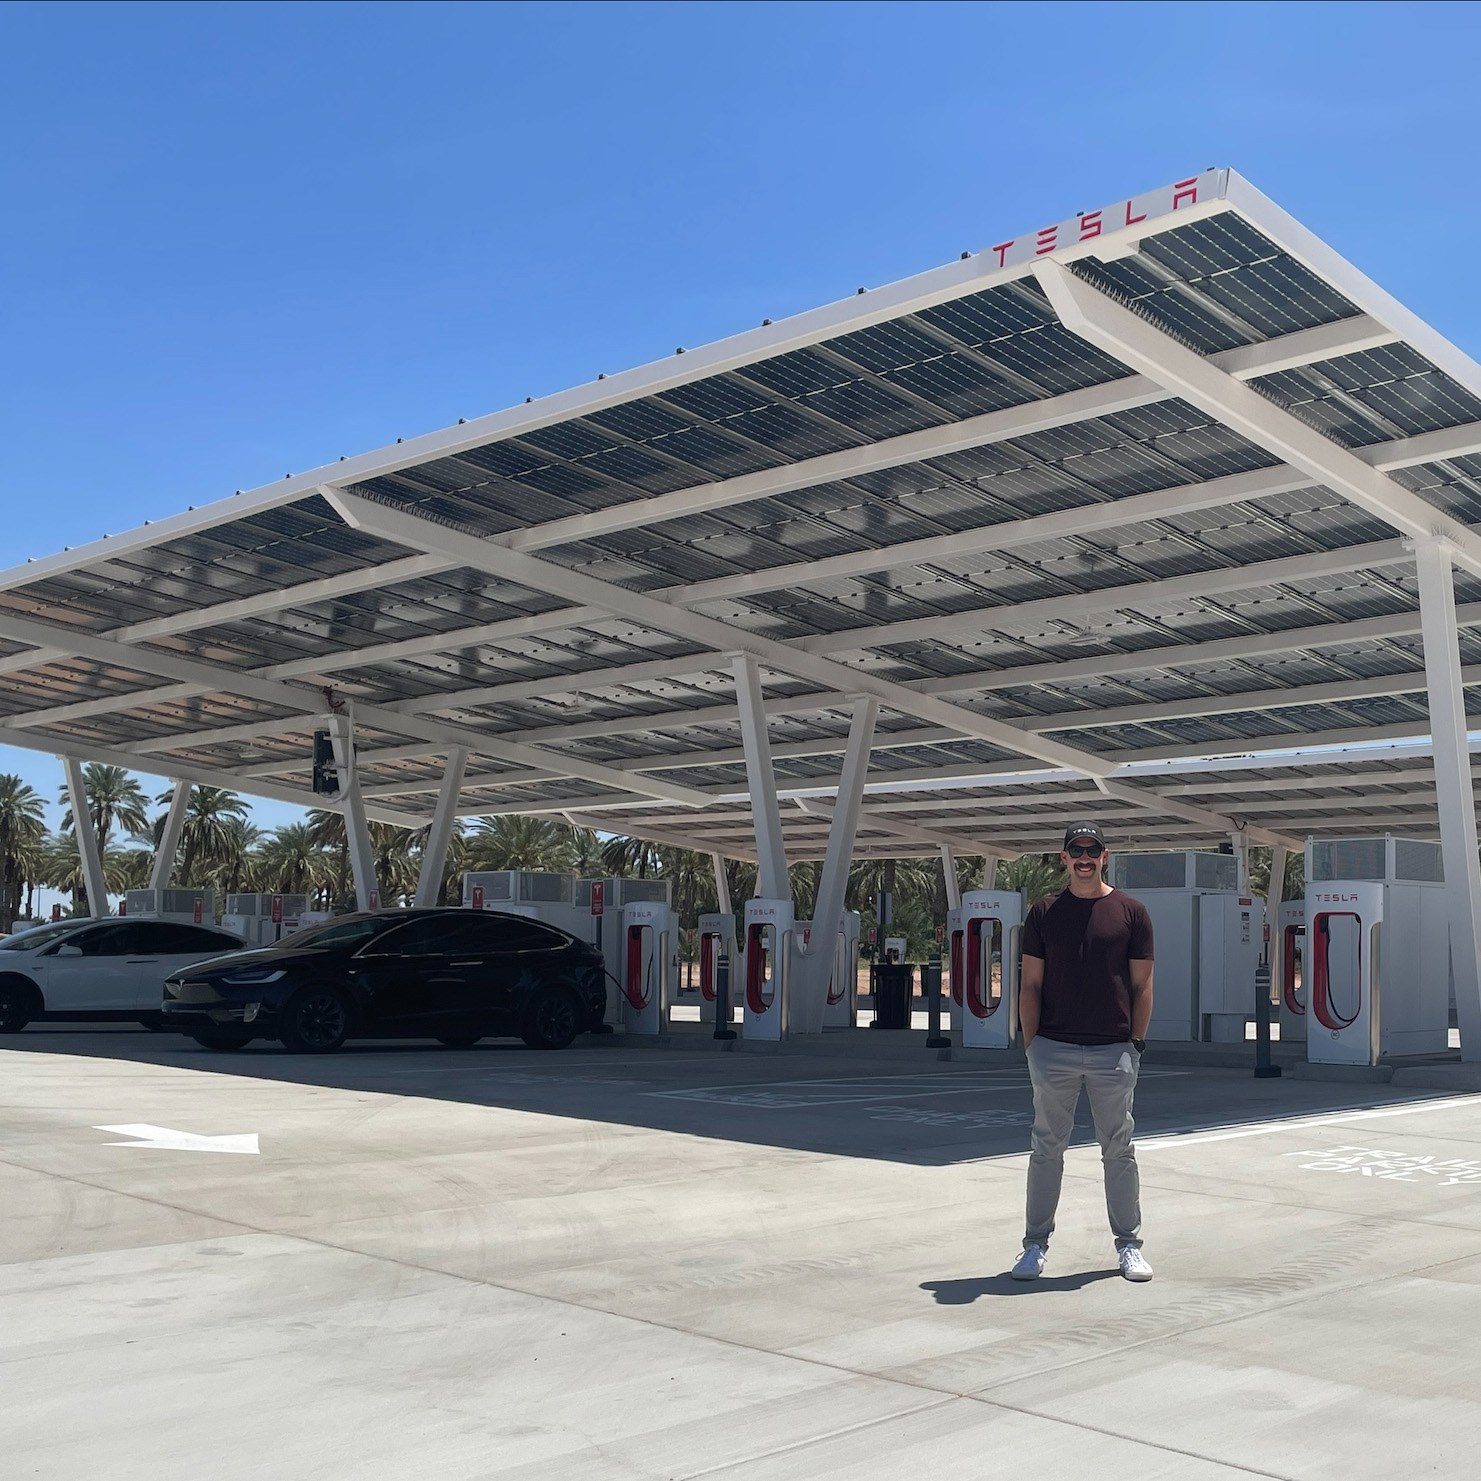 Man standing in front of an outdoor Tesla charging station with canopies overhead used for solar panels.